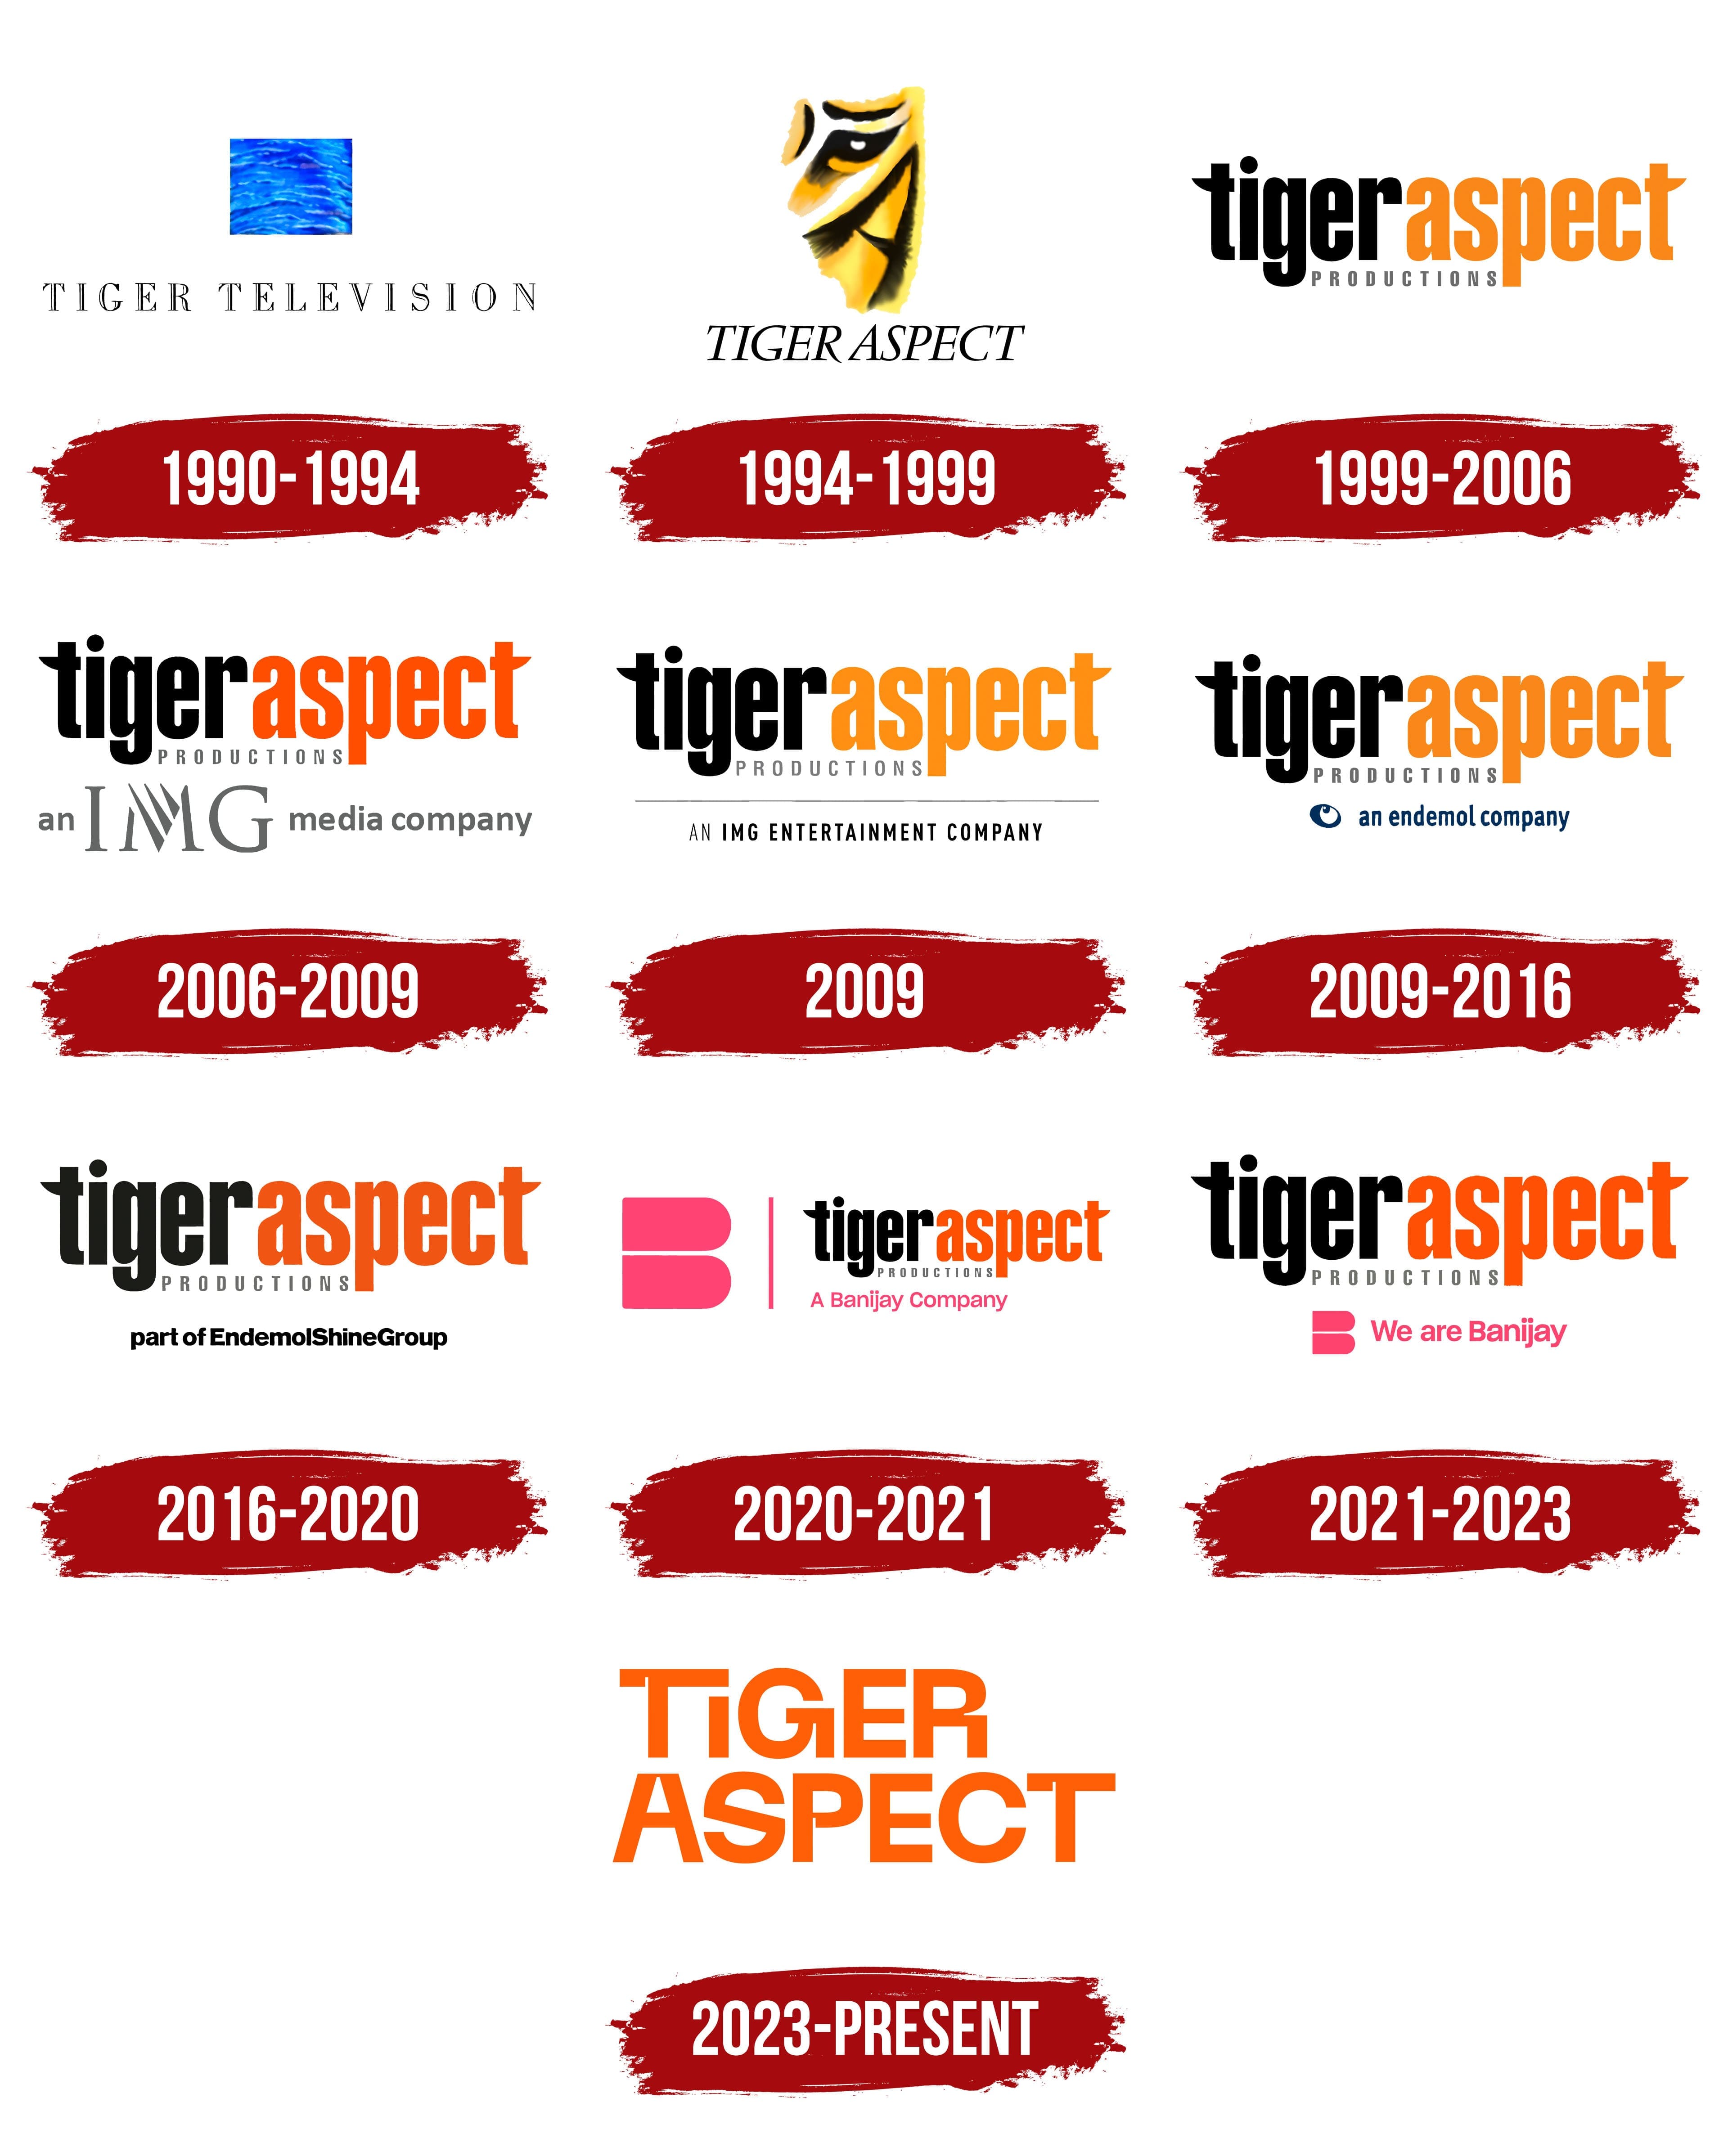 Tiger Aspect Productions Logo, symbol, meaning, history, PNG, brand